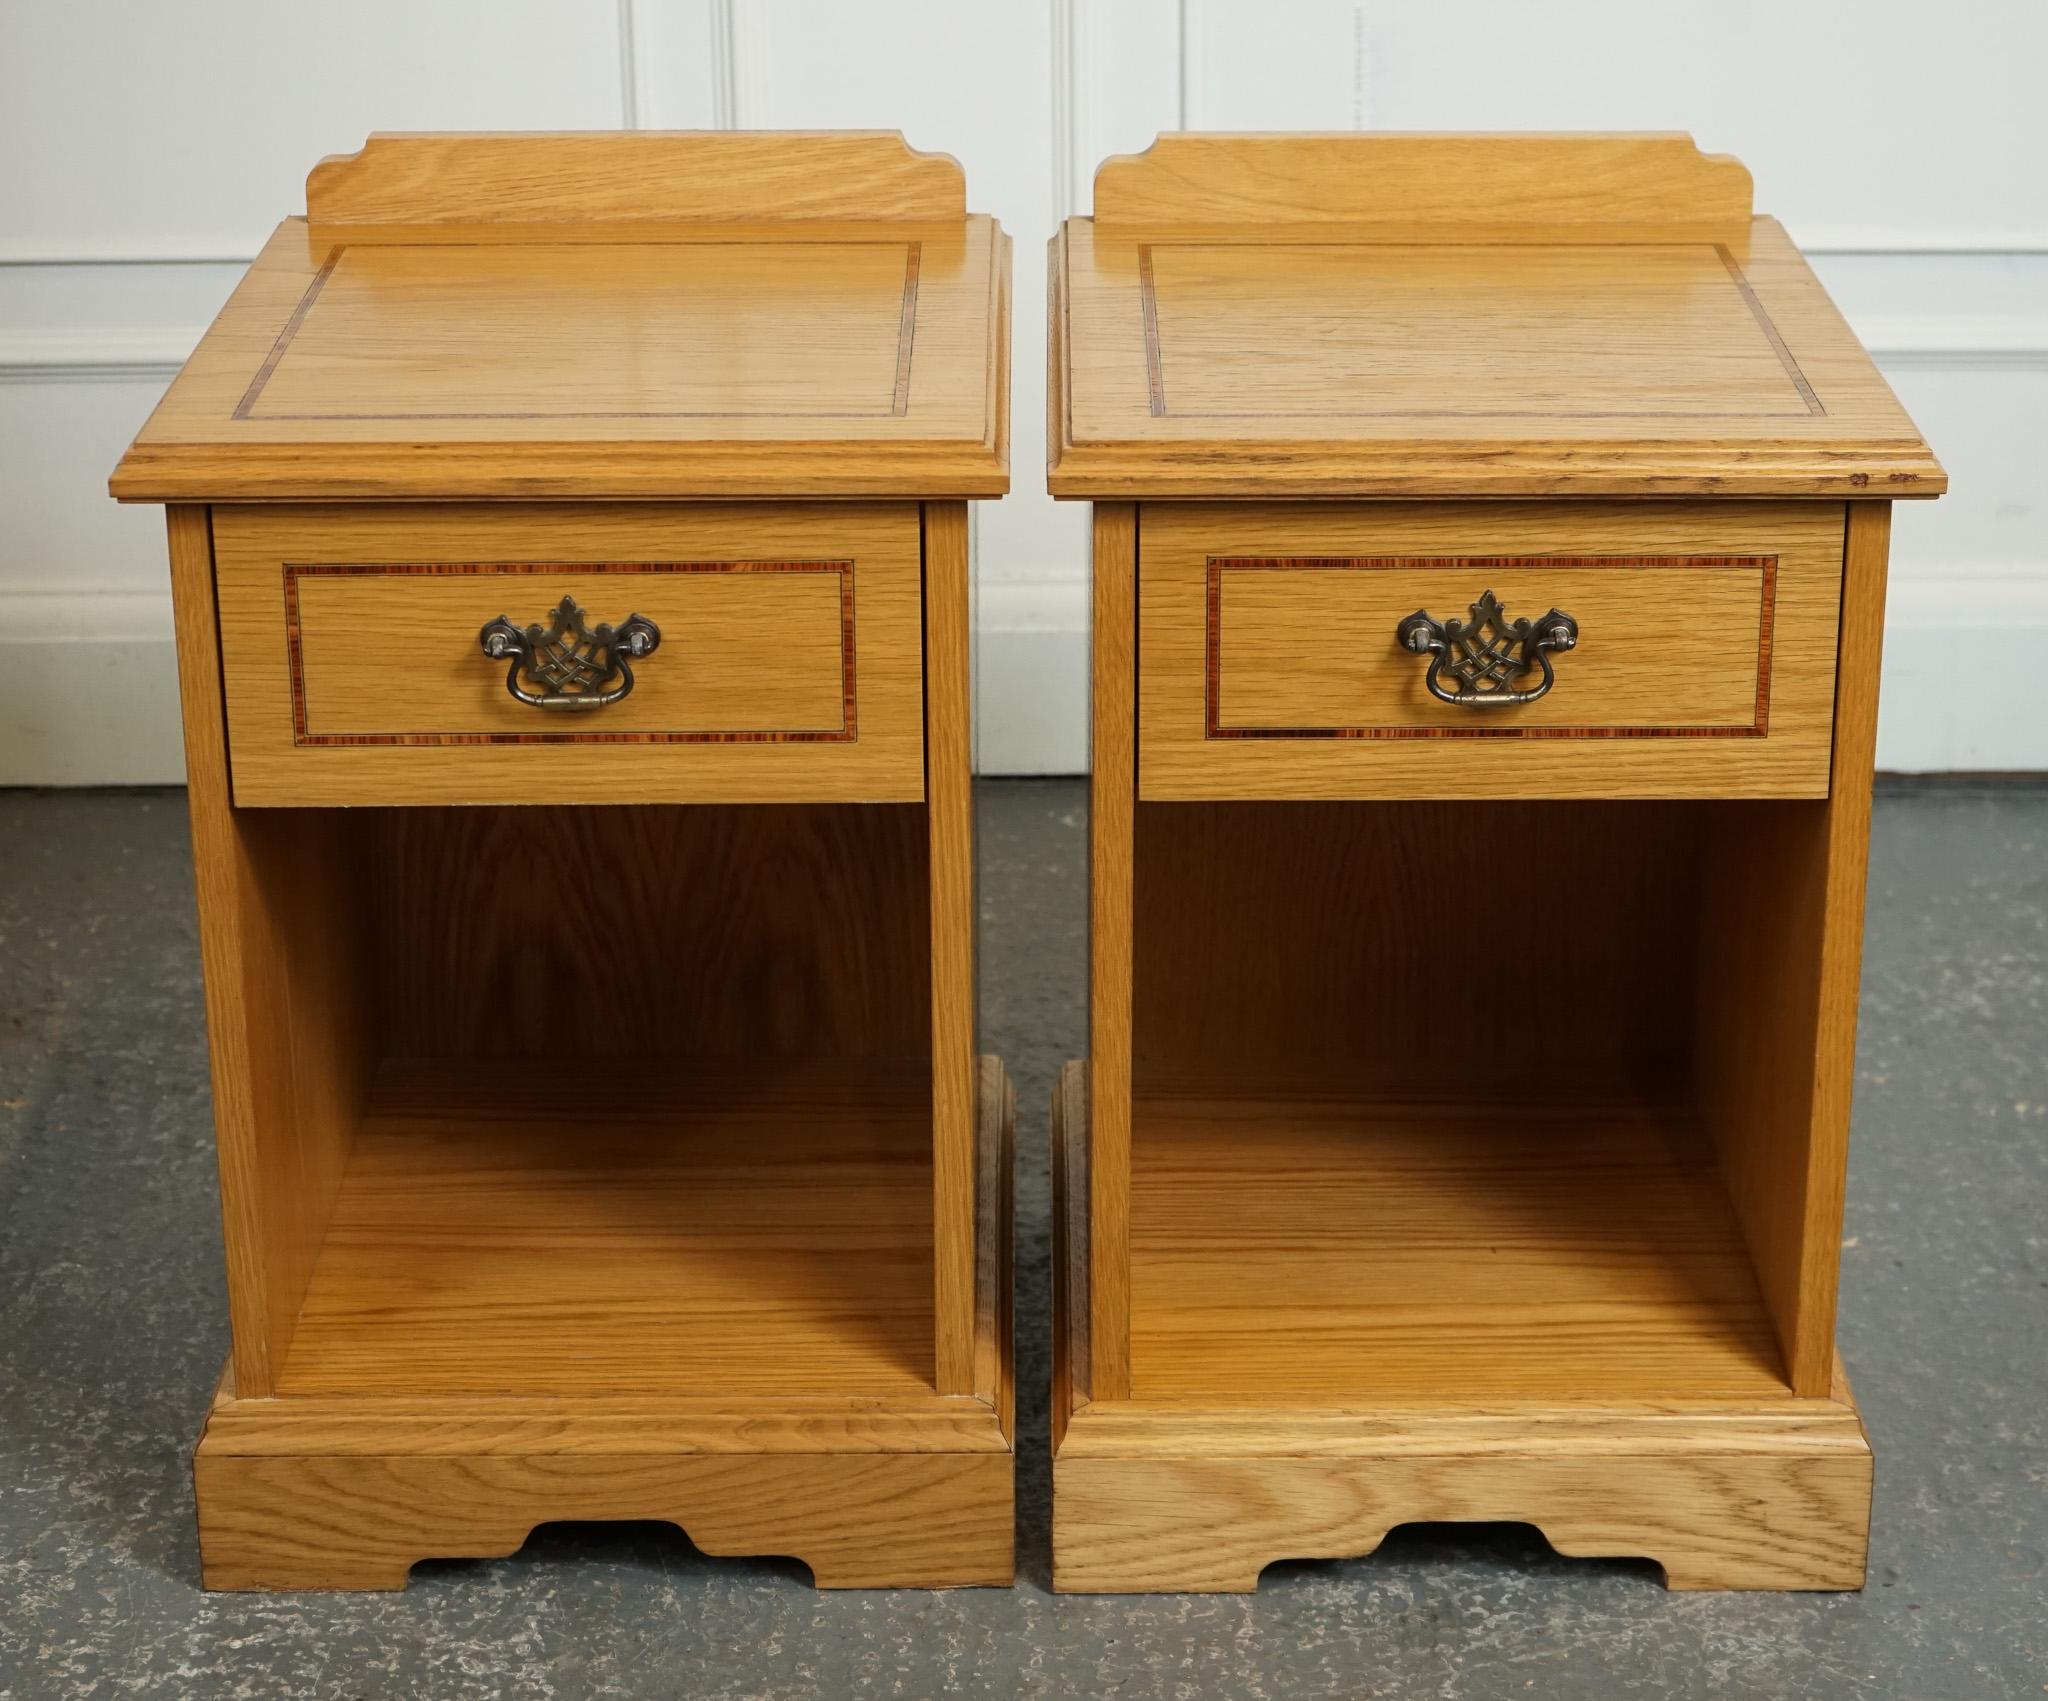 Hand-Crafted VINTAGE PAIR OF OAK KEATS BEDSIDE NIGHTSTAND CABINET MADE BY CURTIS FURNITURE j1 For Sale